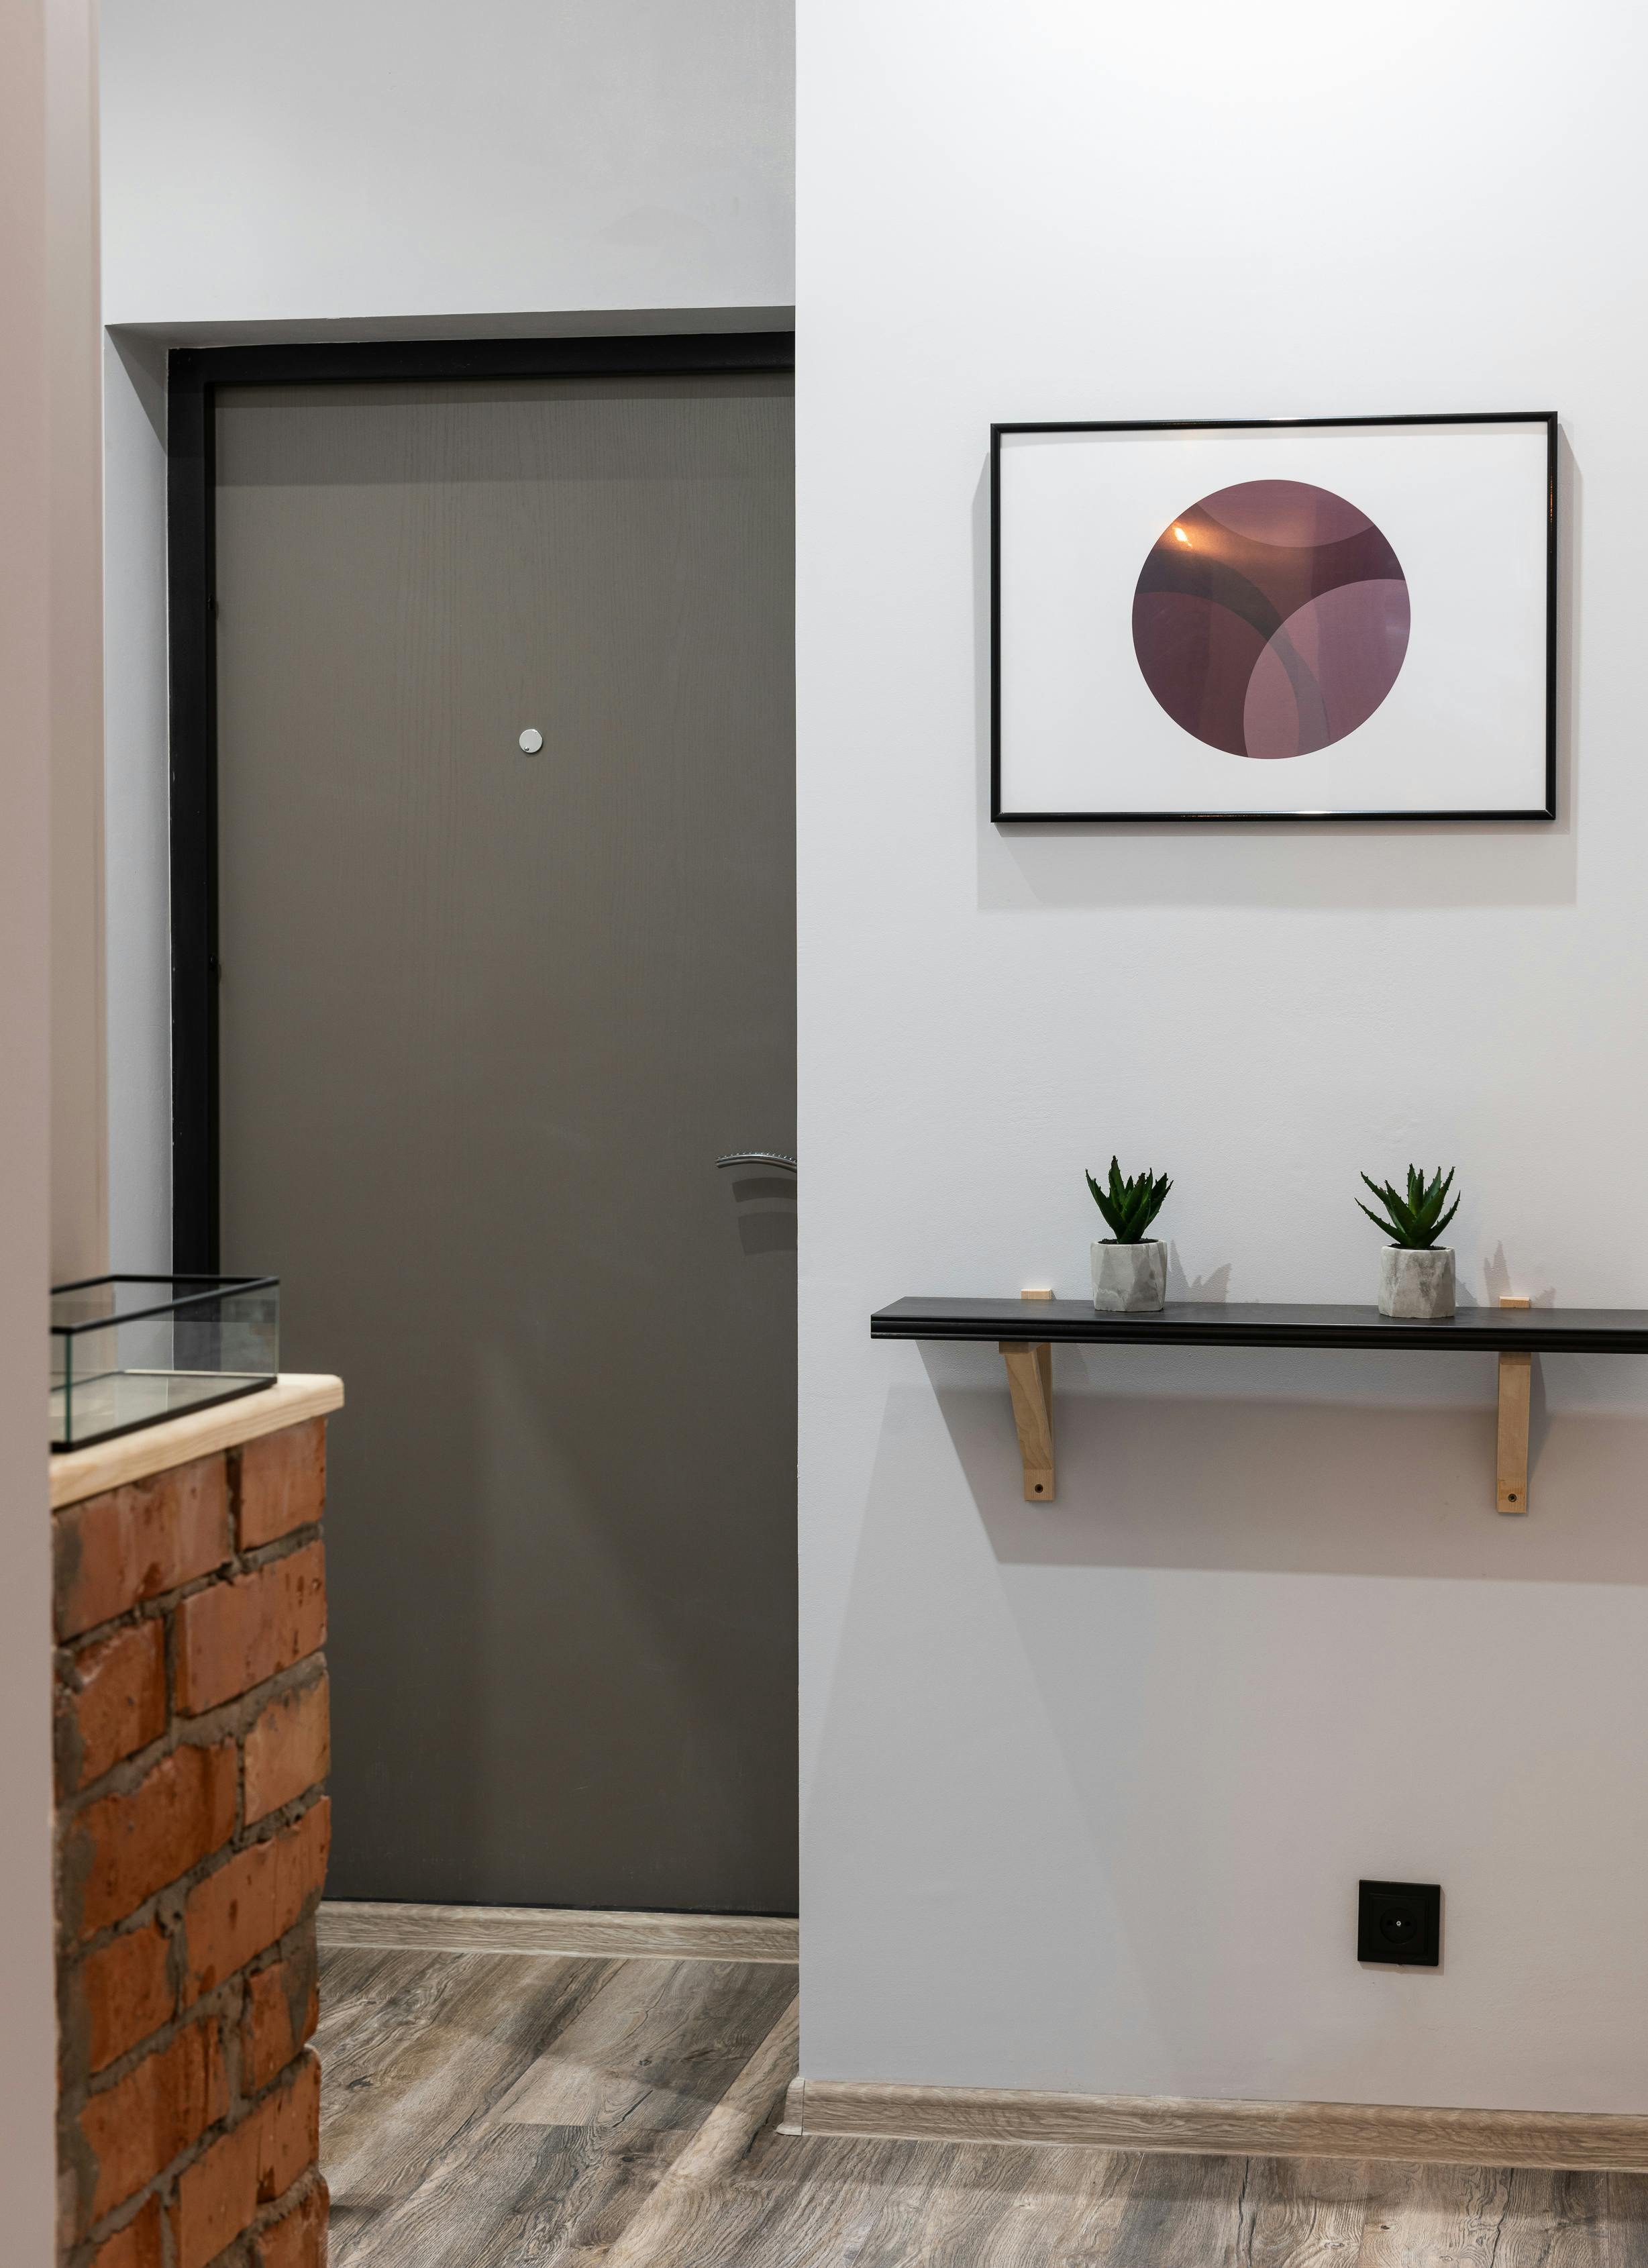 interior of modern flat with entrance door near shelf with plants